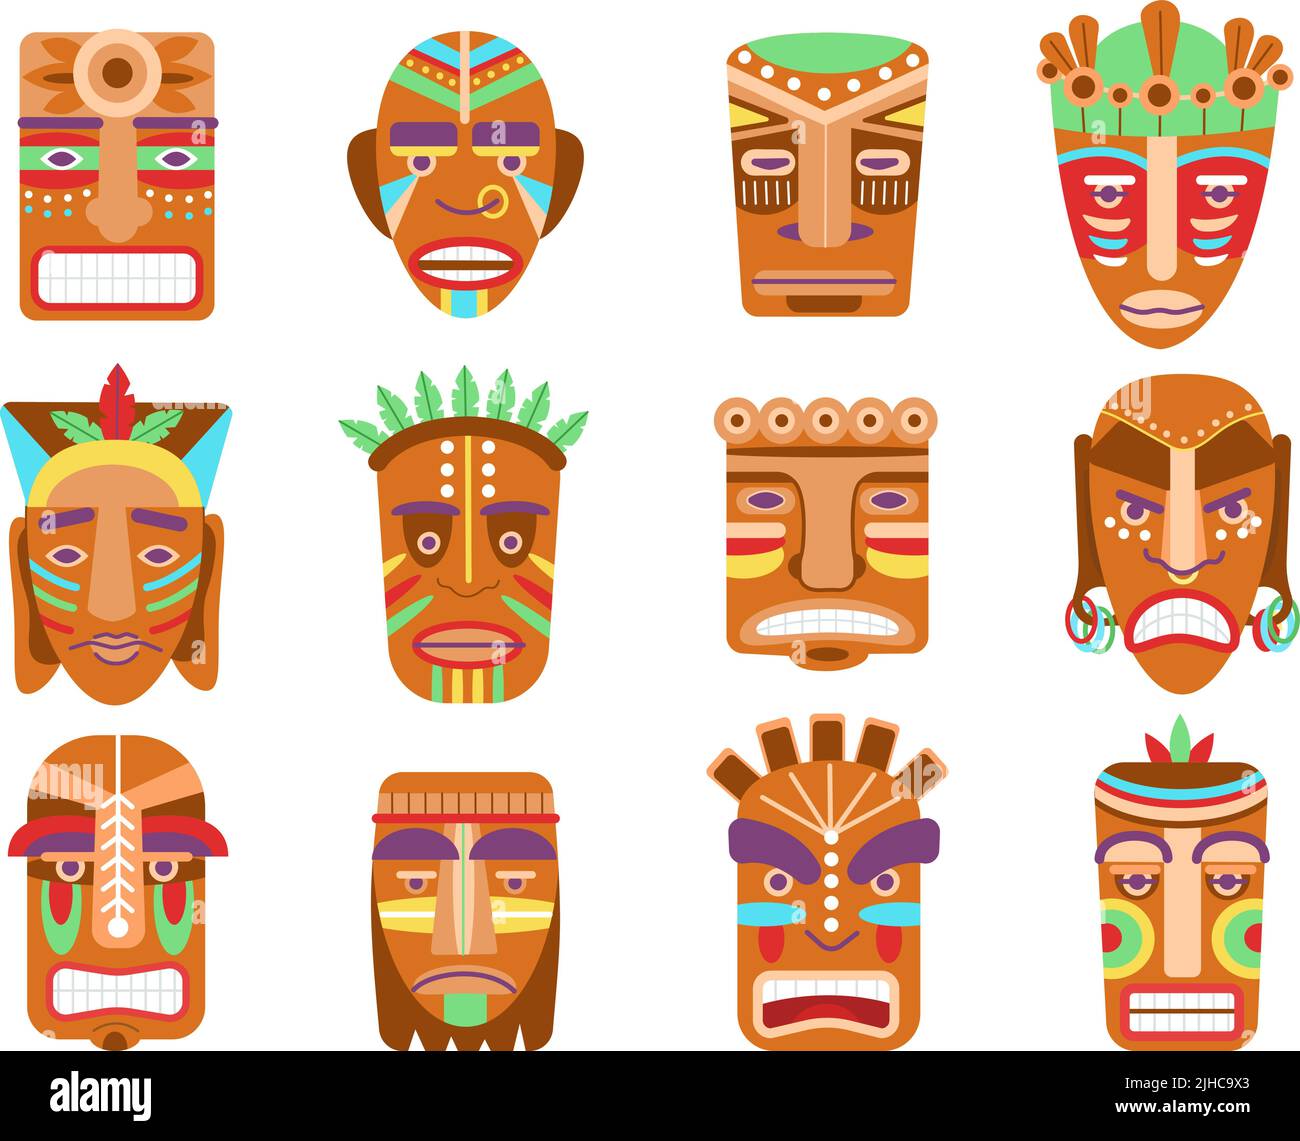 African tiki mask. Ethnic masks, totem hawaii or maya tribes. Wooden warrior gods faces, ornamental tribal aztec idols. Scary decorations decent Stock Vector